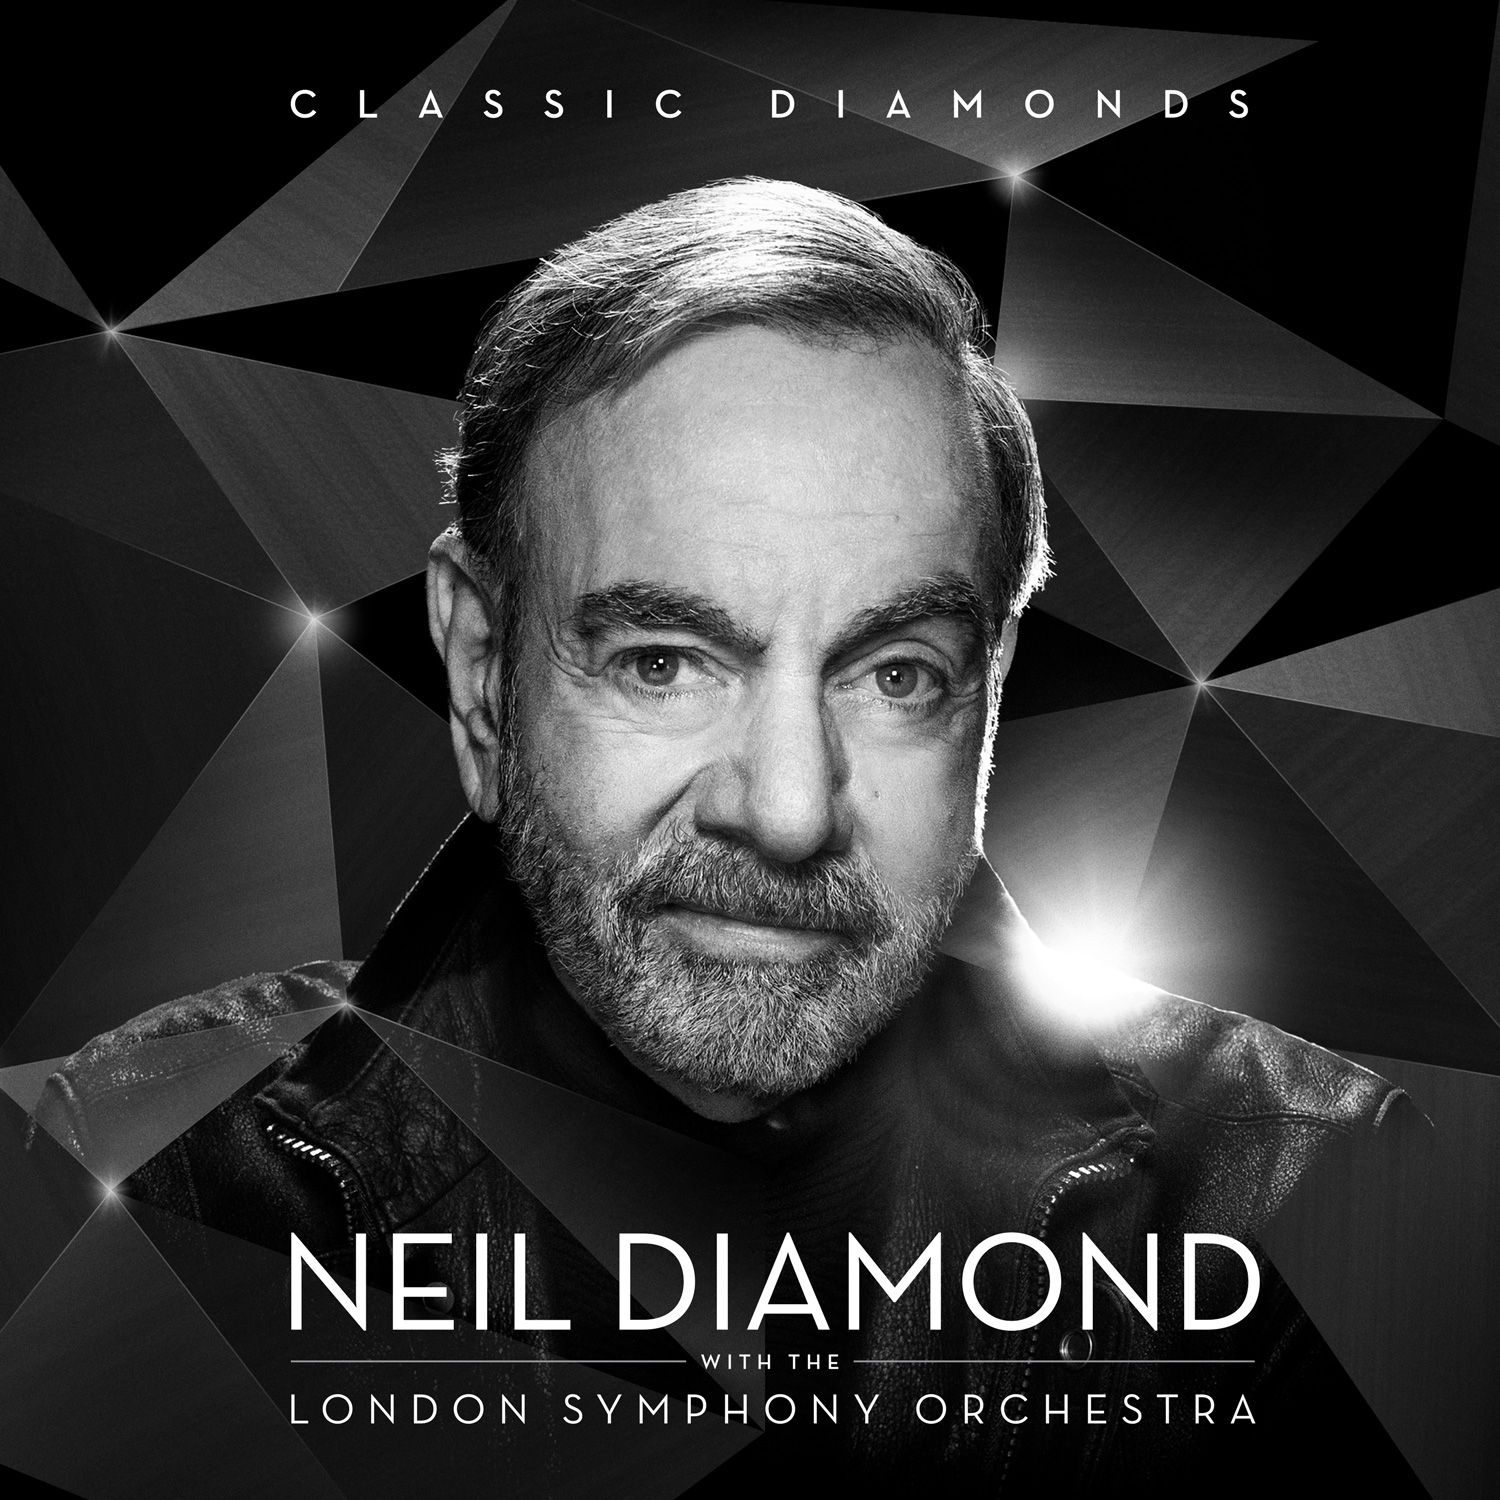 Capitol/UME to release ‘Neil Diamond With The London Symphony Orchestra, Classic Diamonds’ on November 20